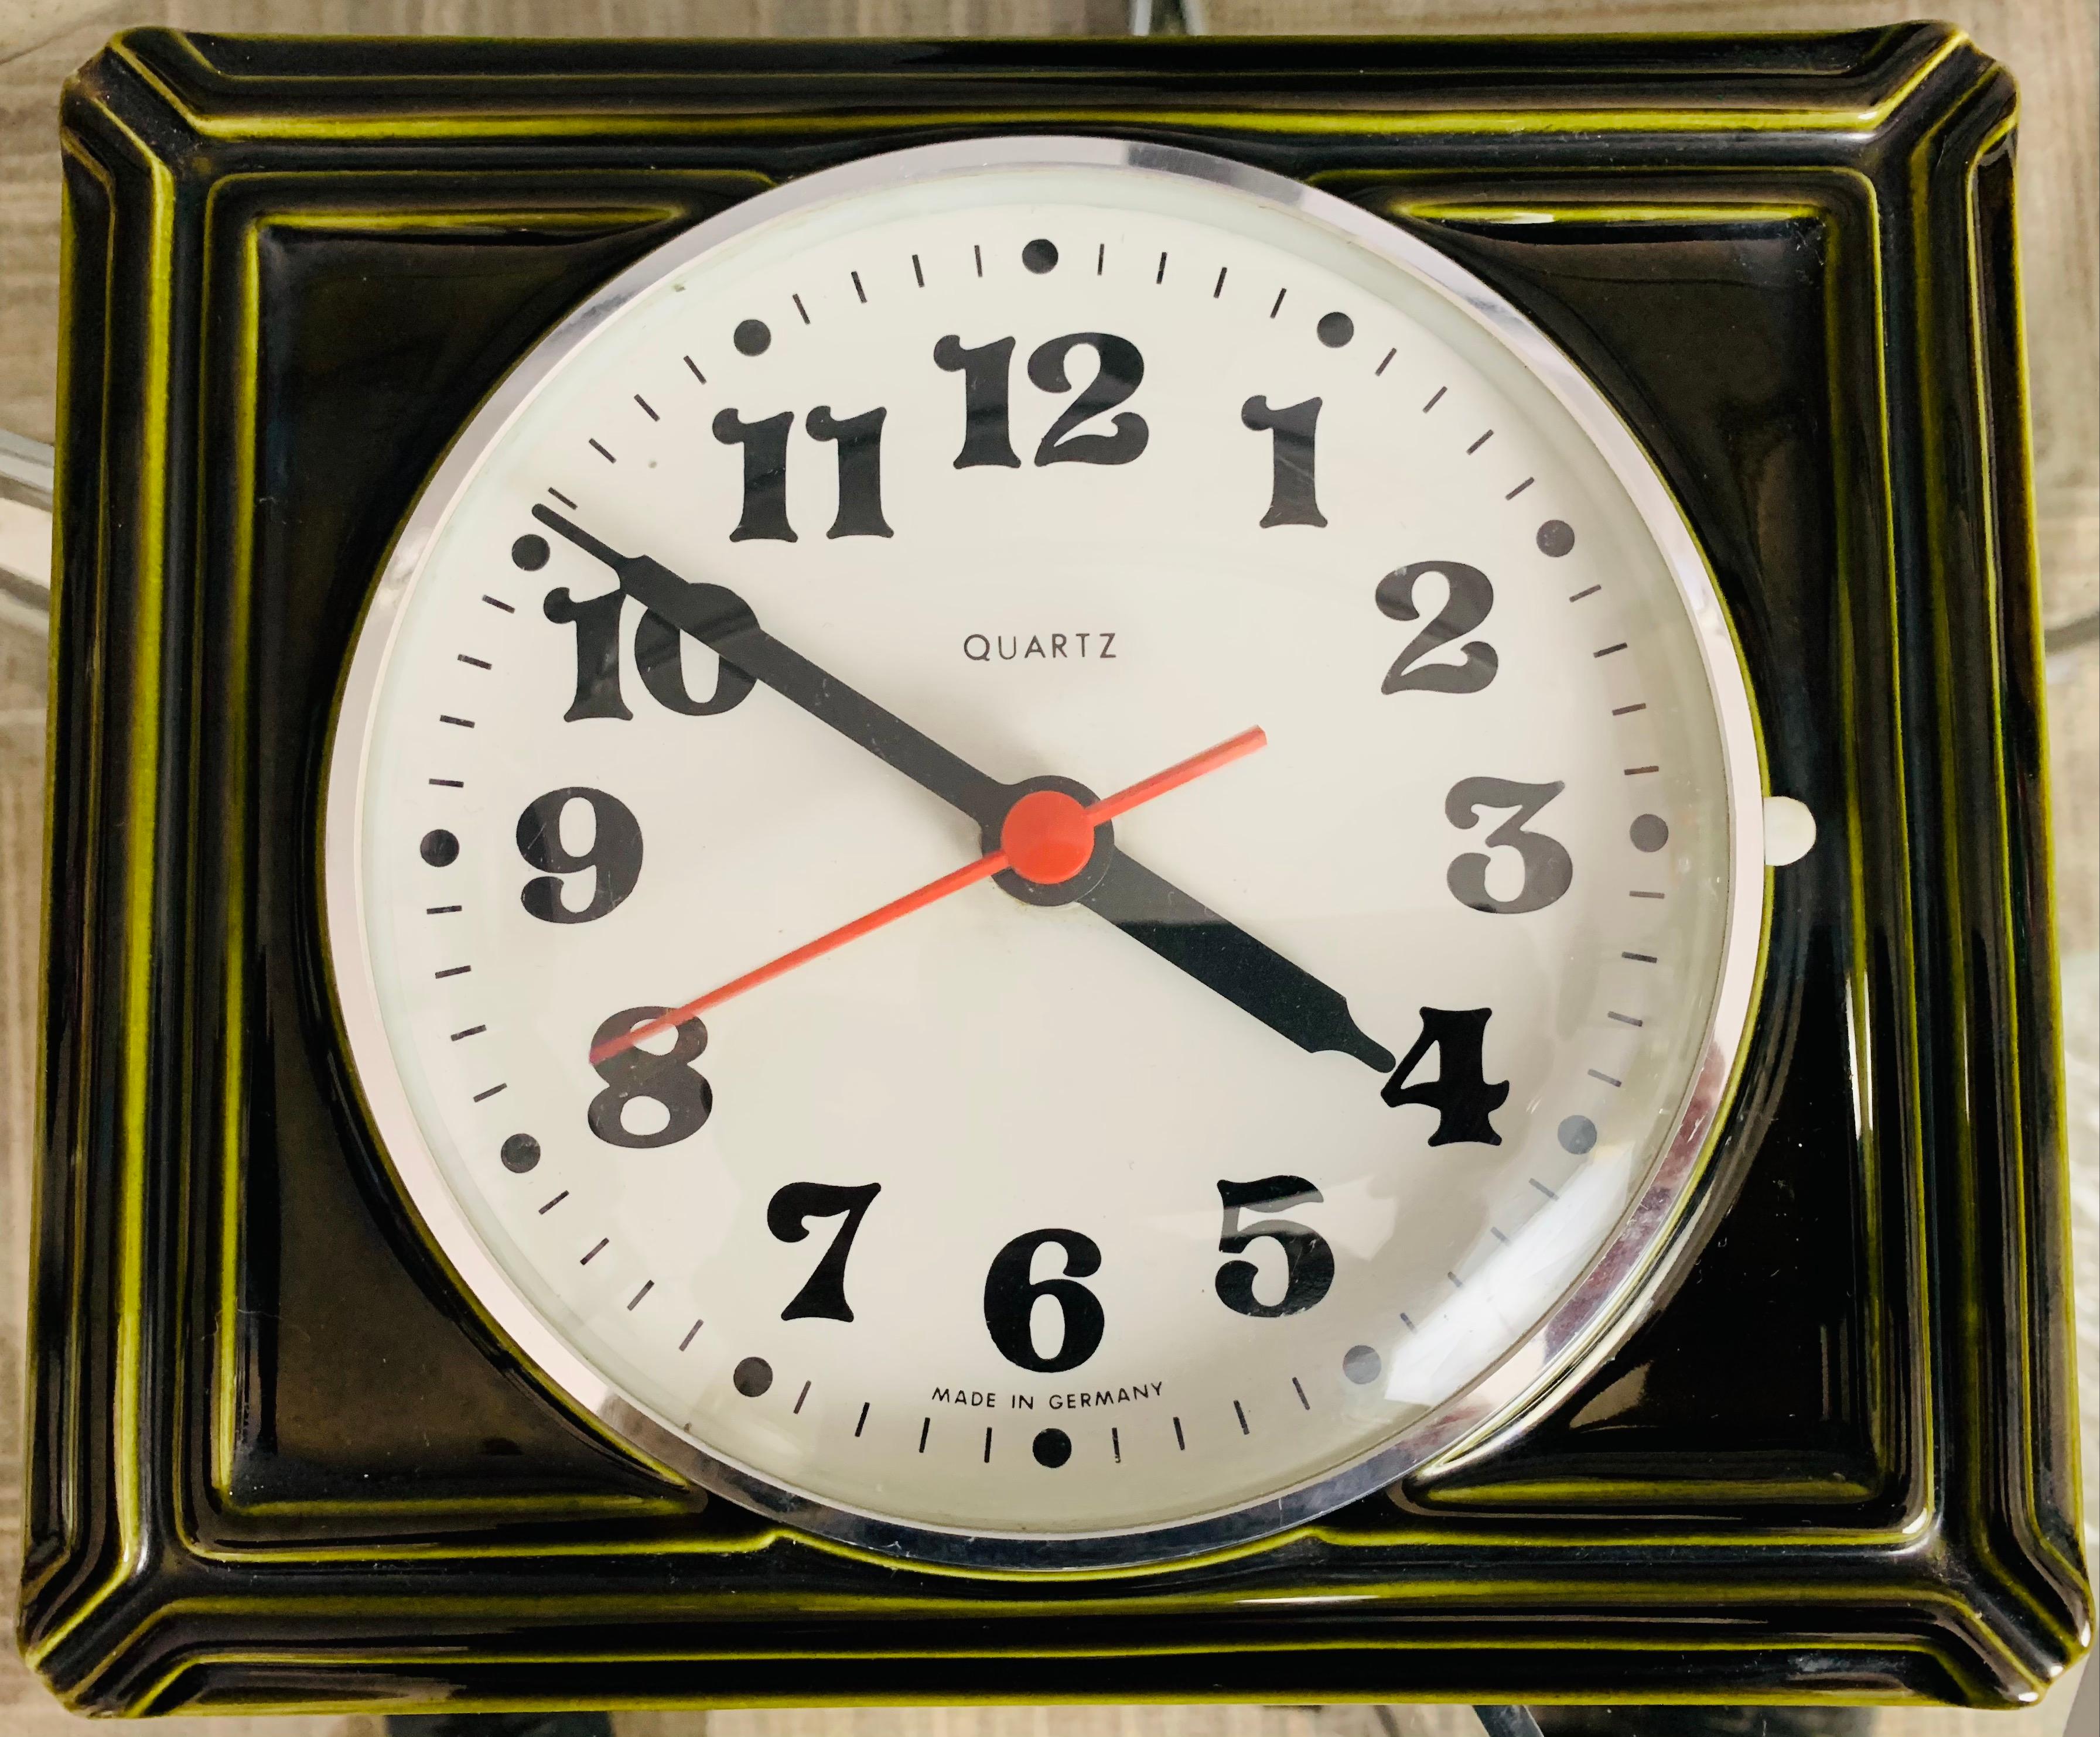 A vintage, 1970s, German Quartz green ceramic rectangular wall clock with a white clock face and black numerals. The clock face is protected with a plastic cover and silver surround which opens to the right. The hands are black and the second hand